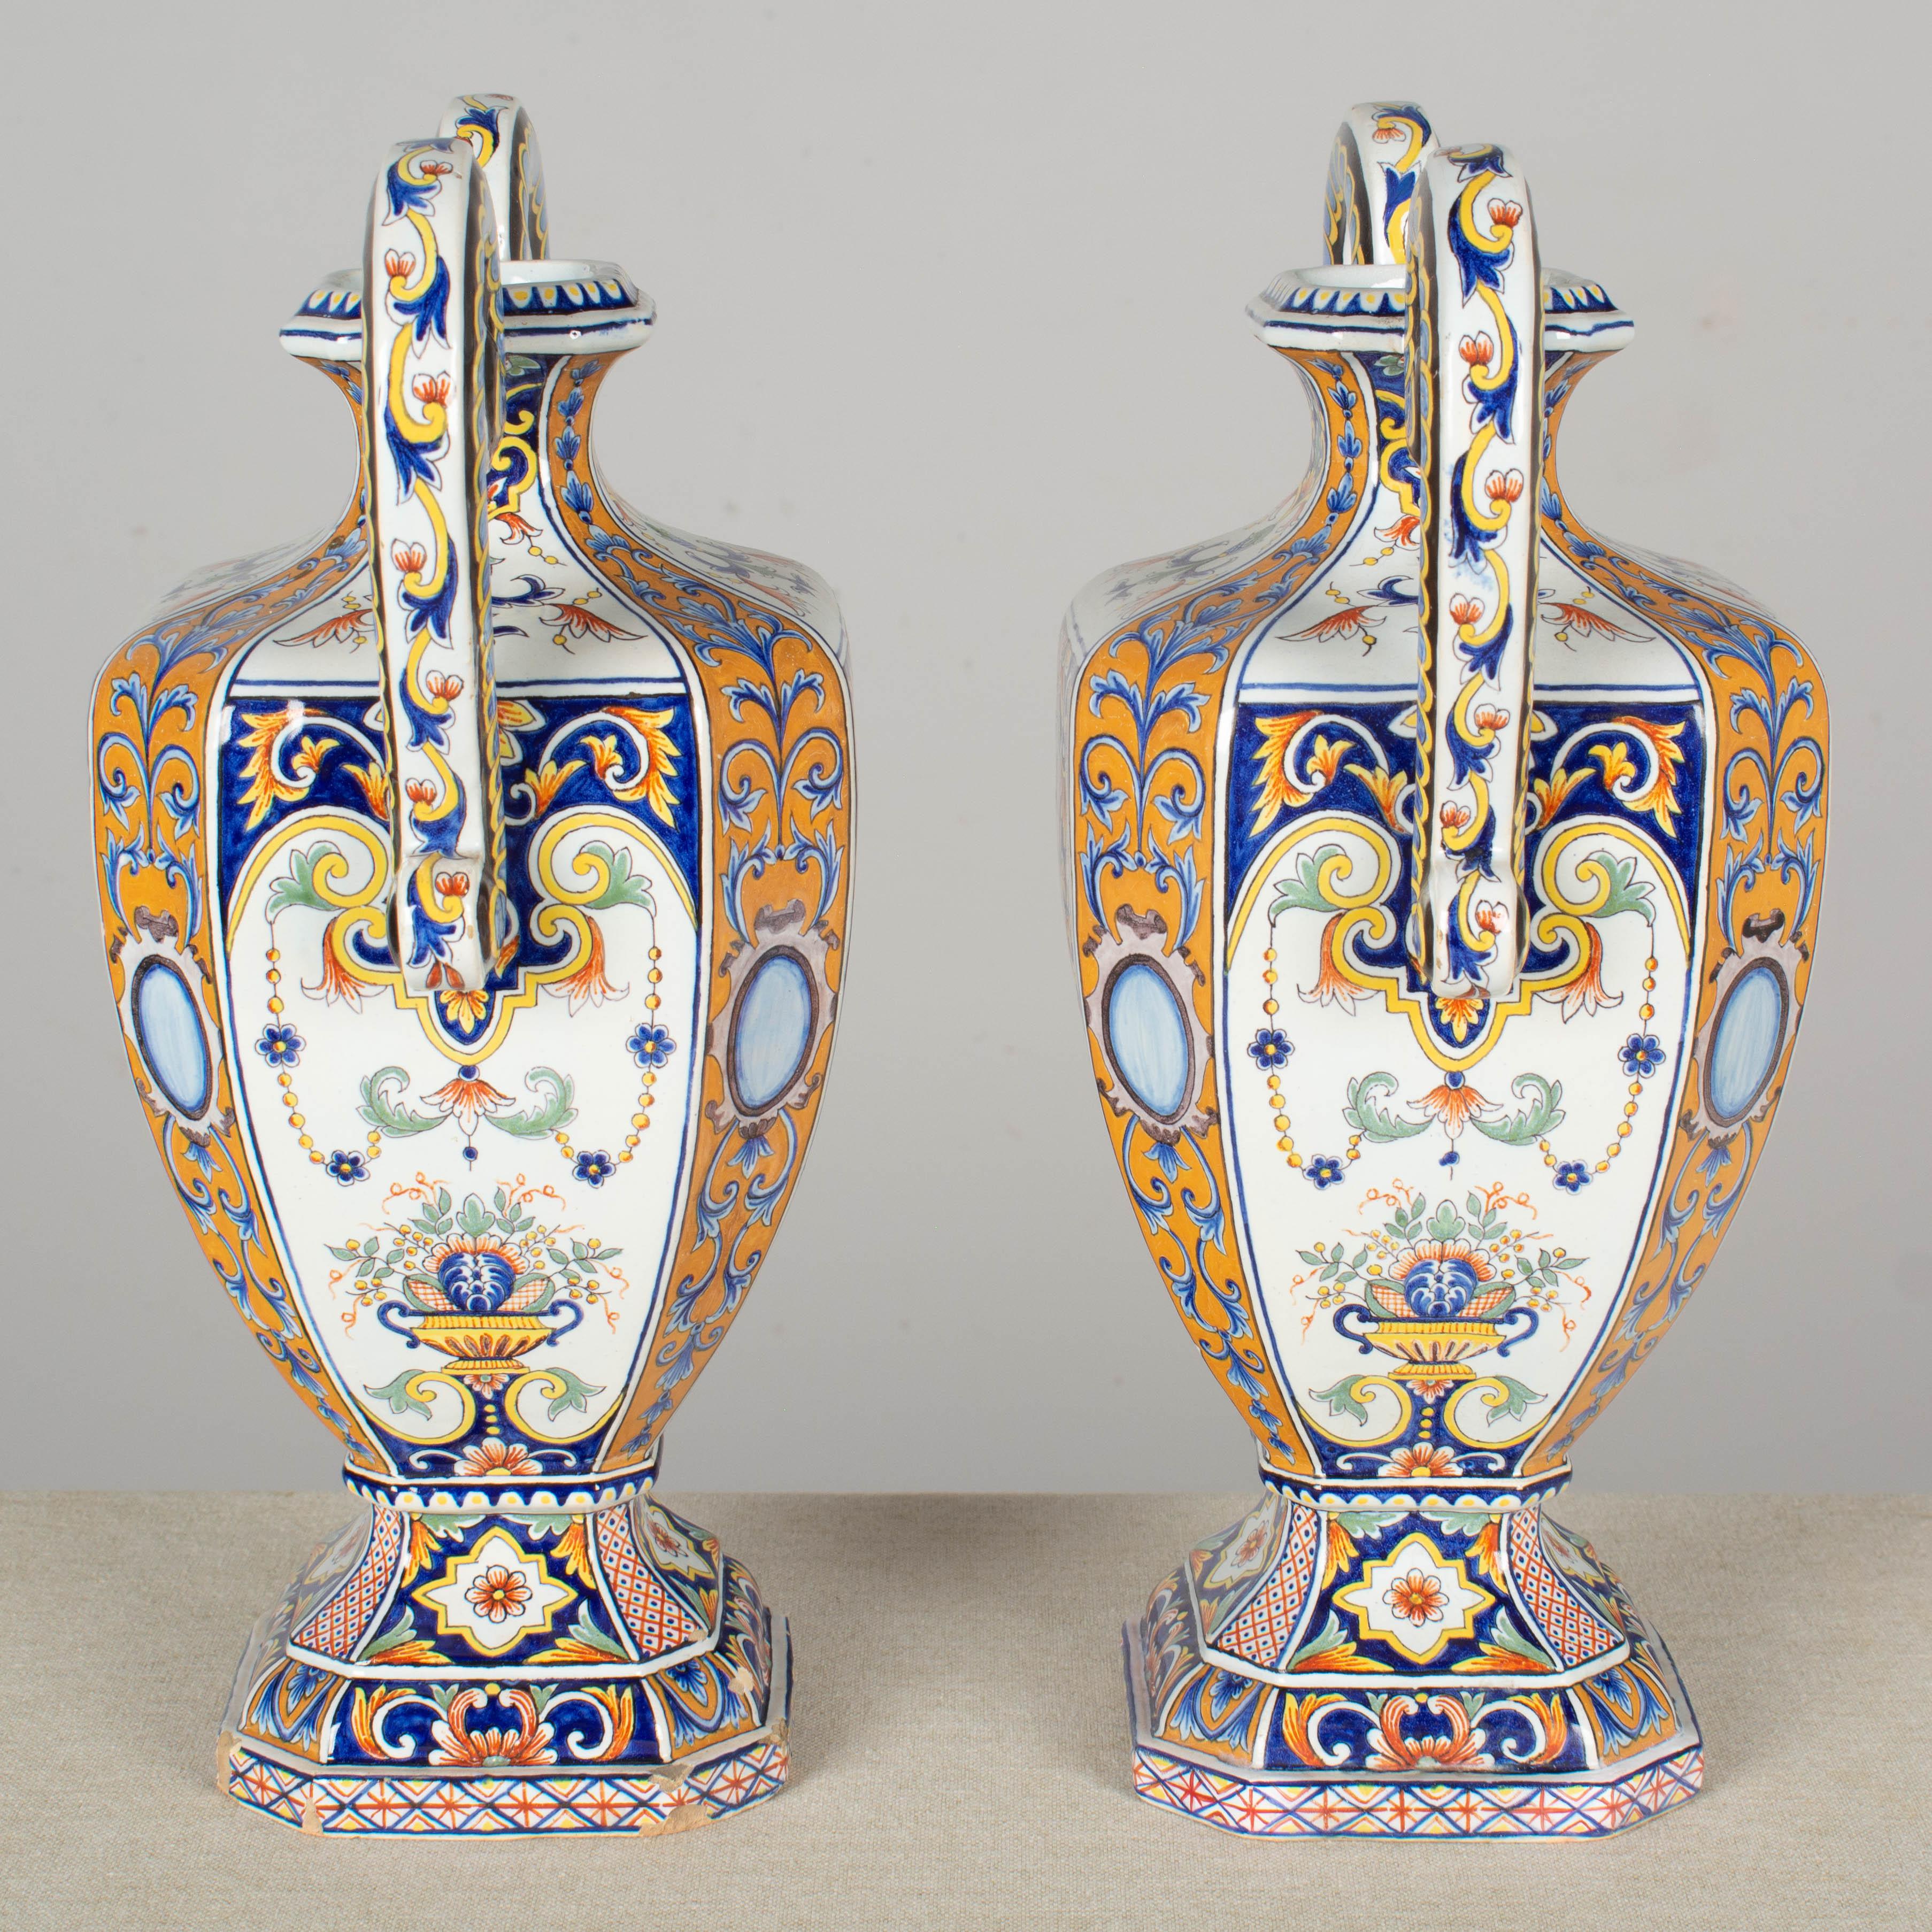 19th Century French Desvres Faience Urn Form Vases, a Pair For Sale 1